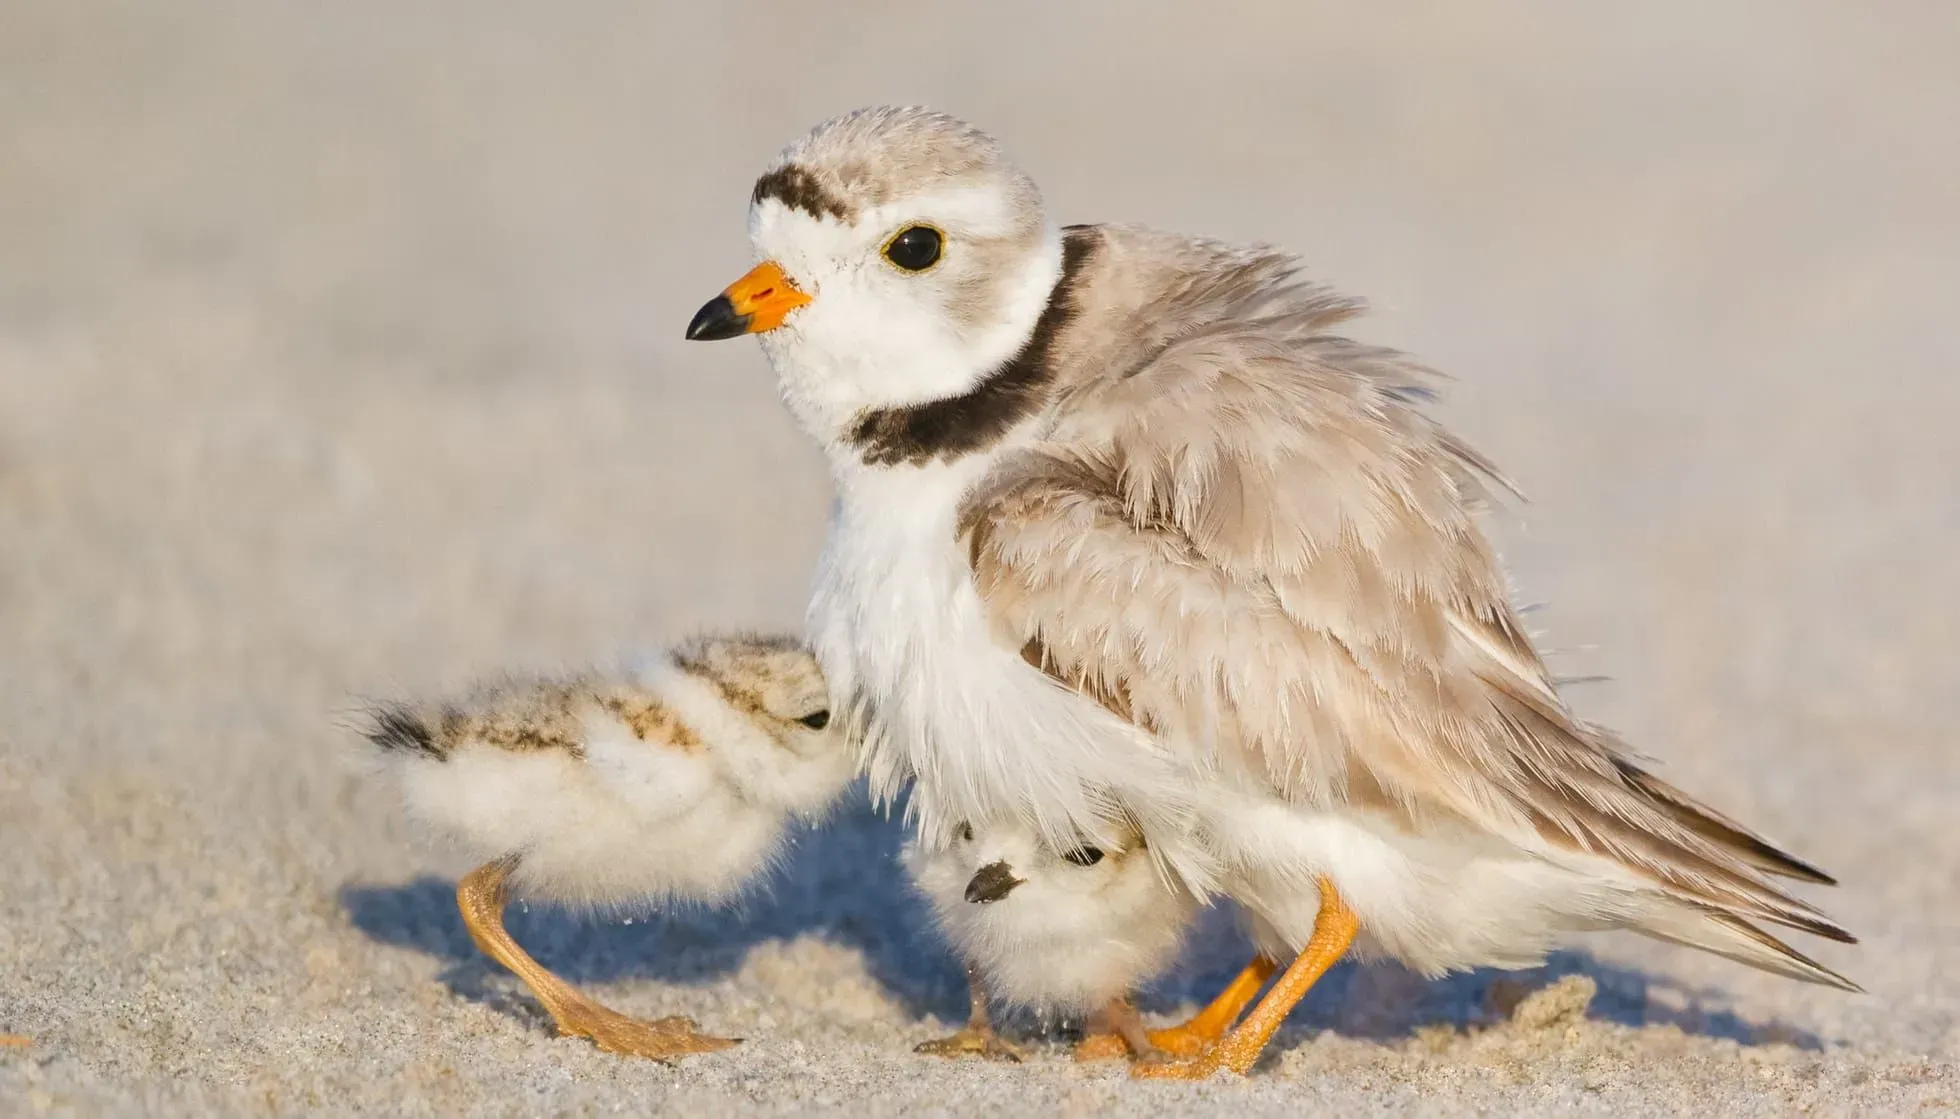  Piping Plover